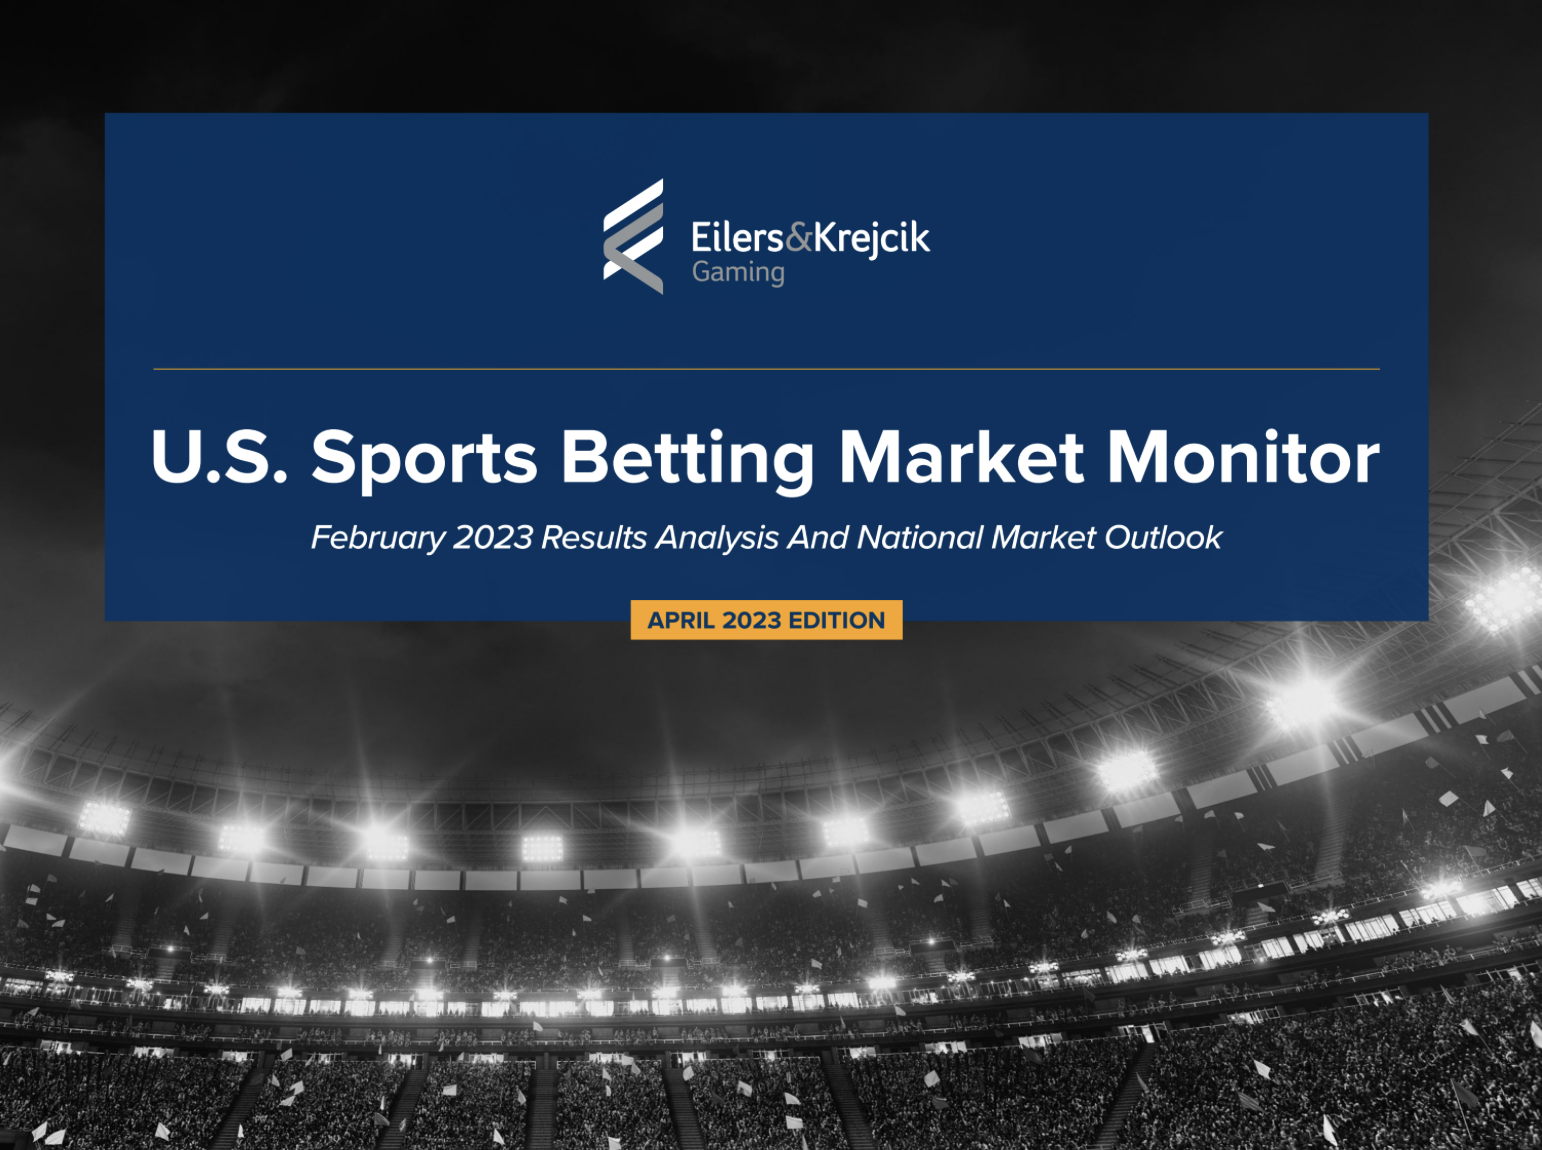 OnestData appointed market research partner for European Gaming & Betting  Association - Newsbook